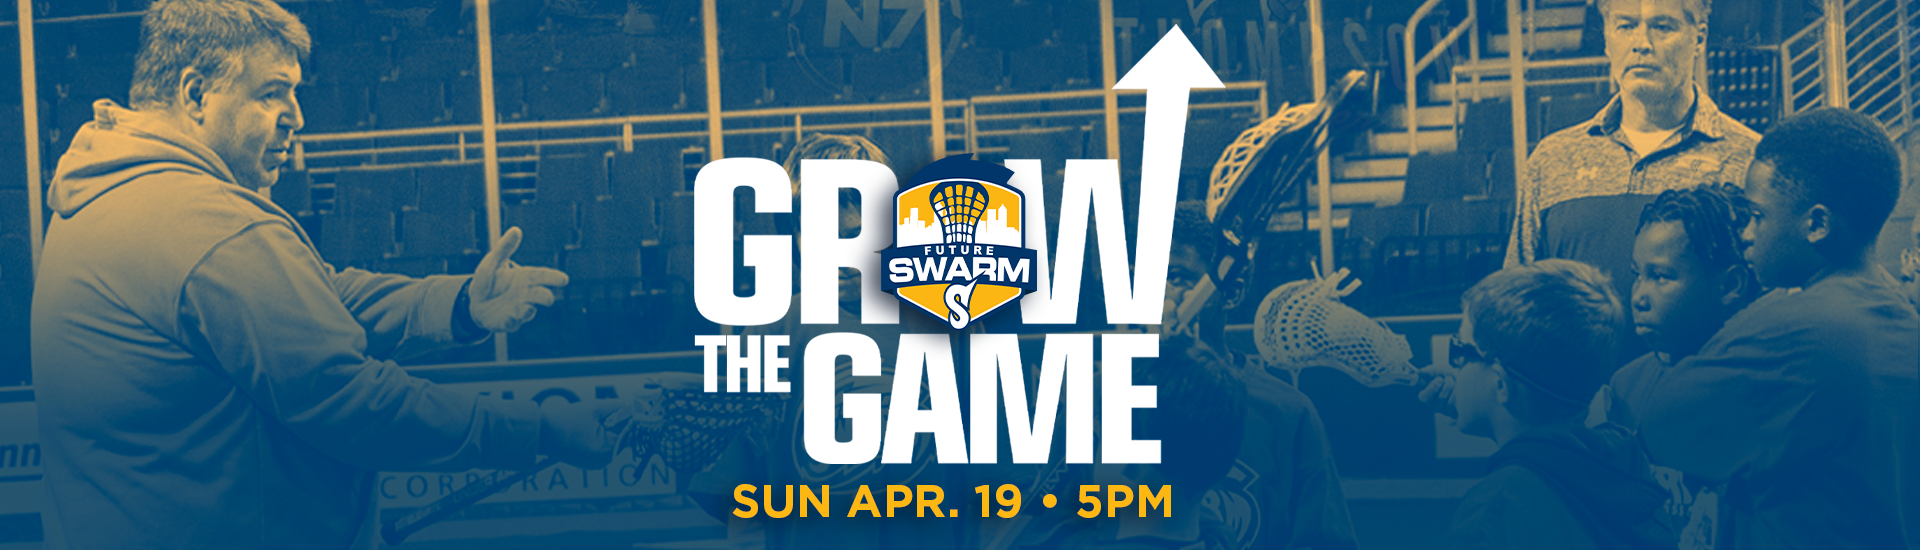 Grow the game event banner image